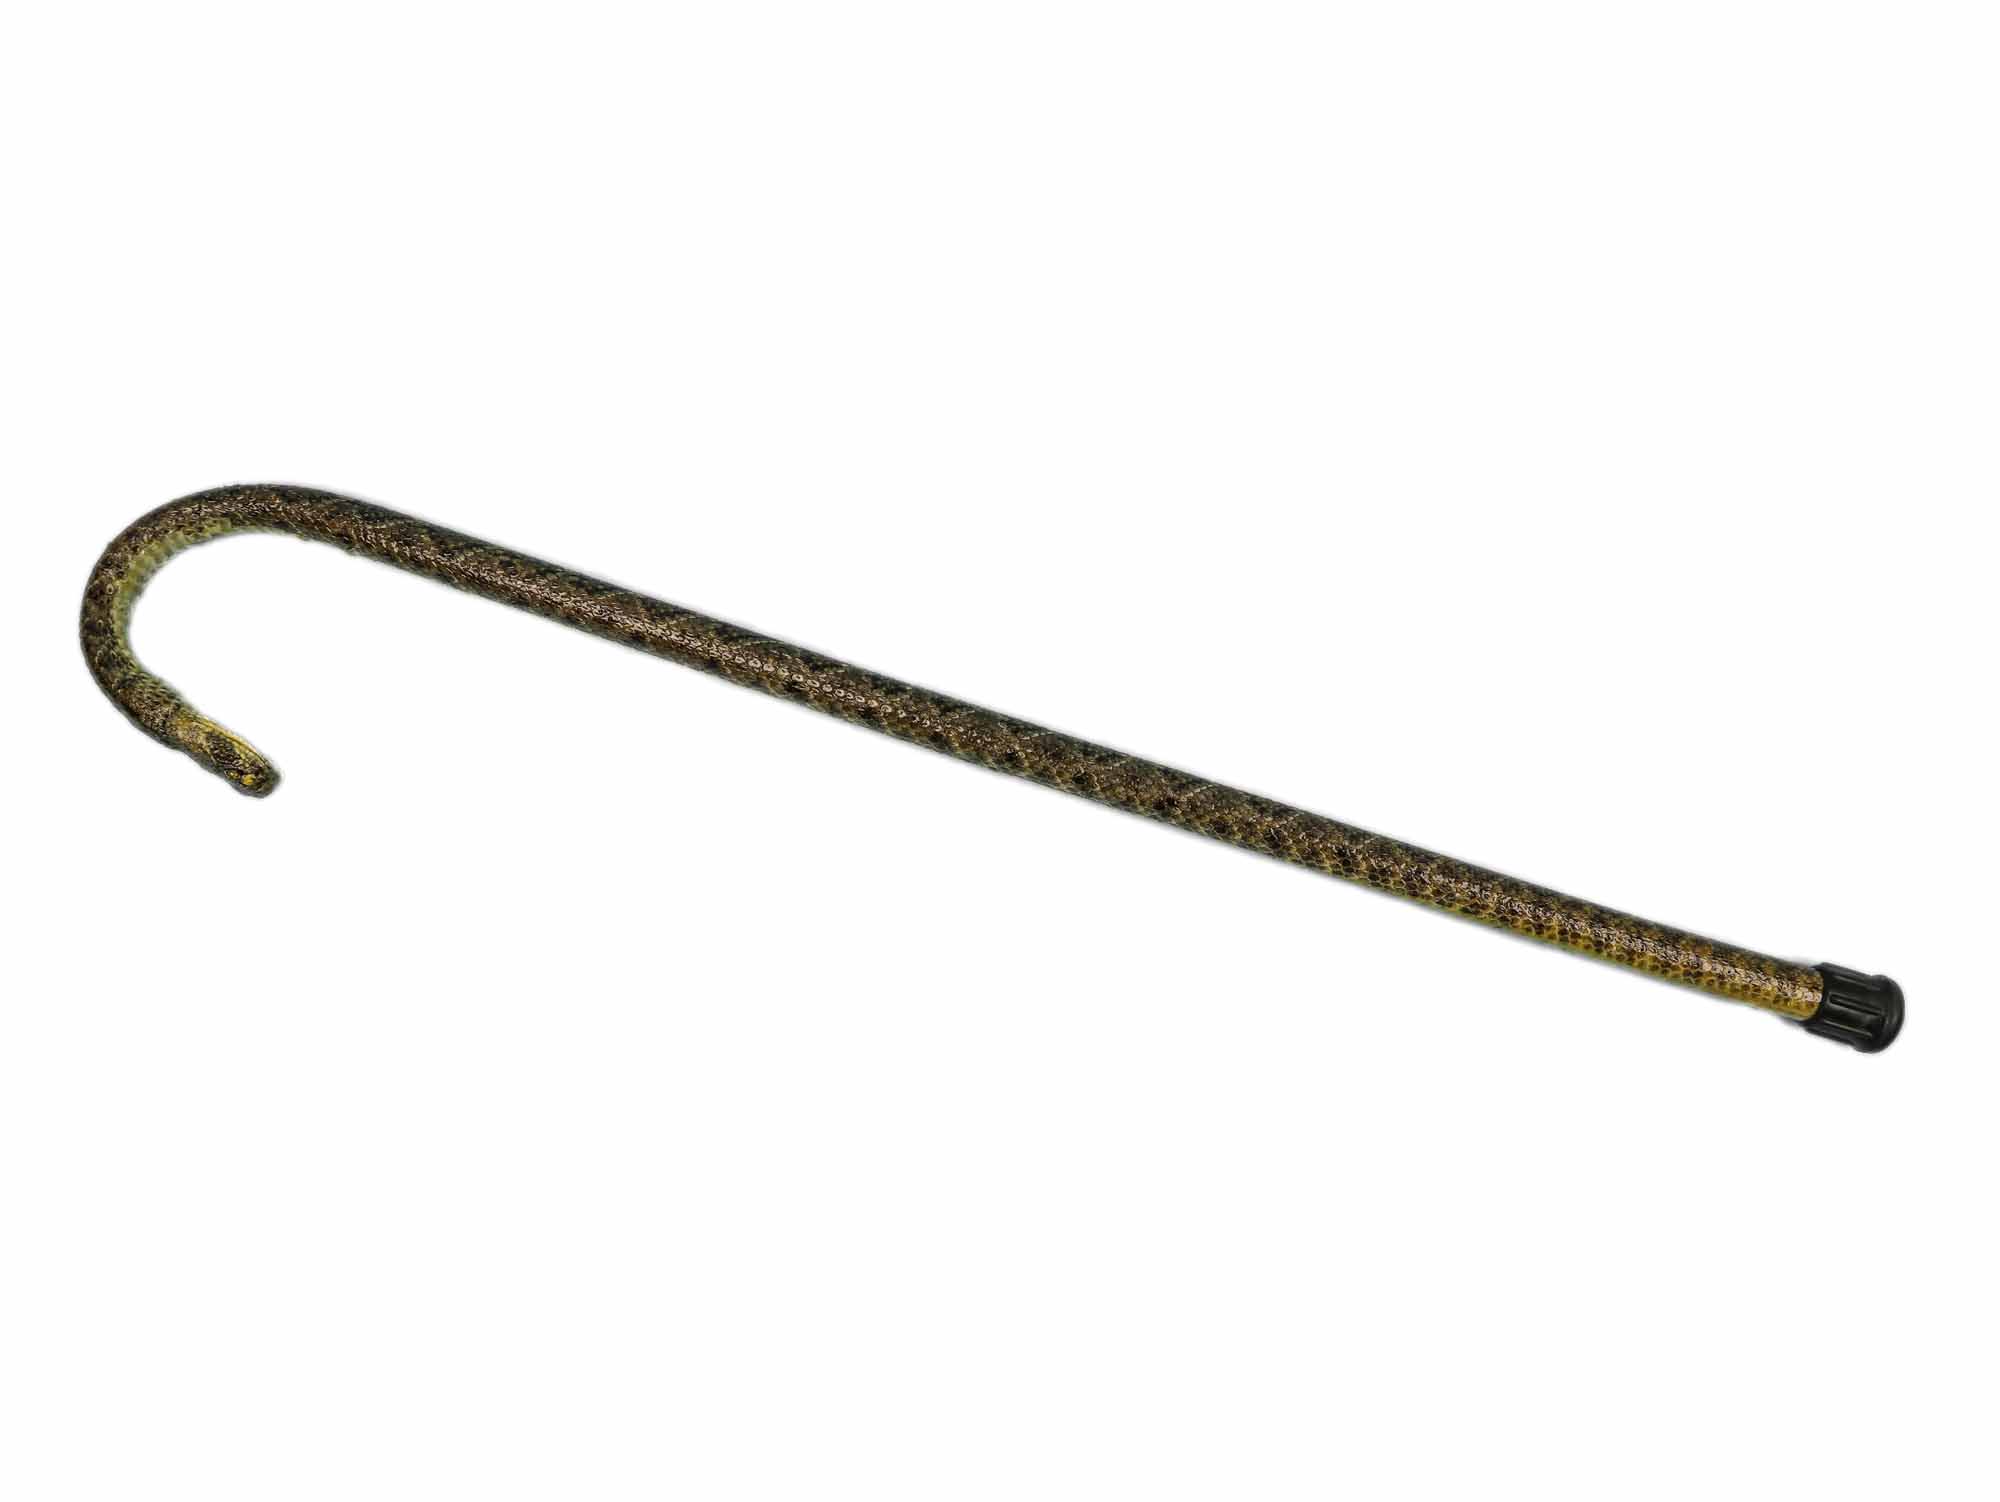 Real Rattlesnake Cane: Closed Mouth: Gallery Item 